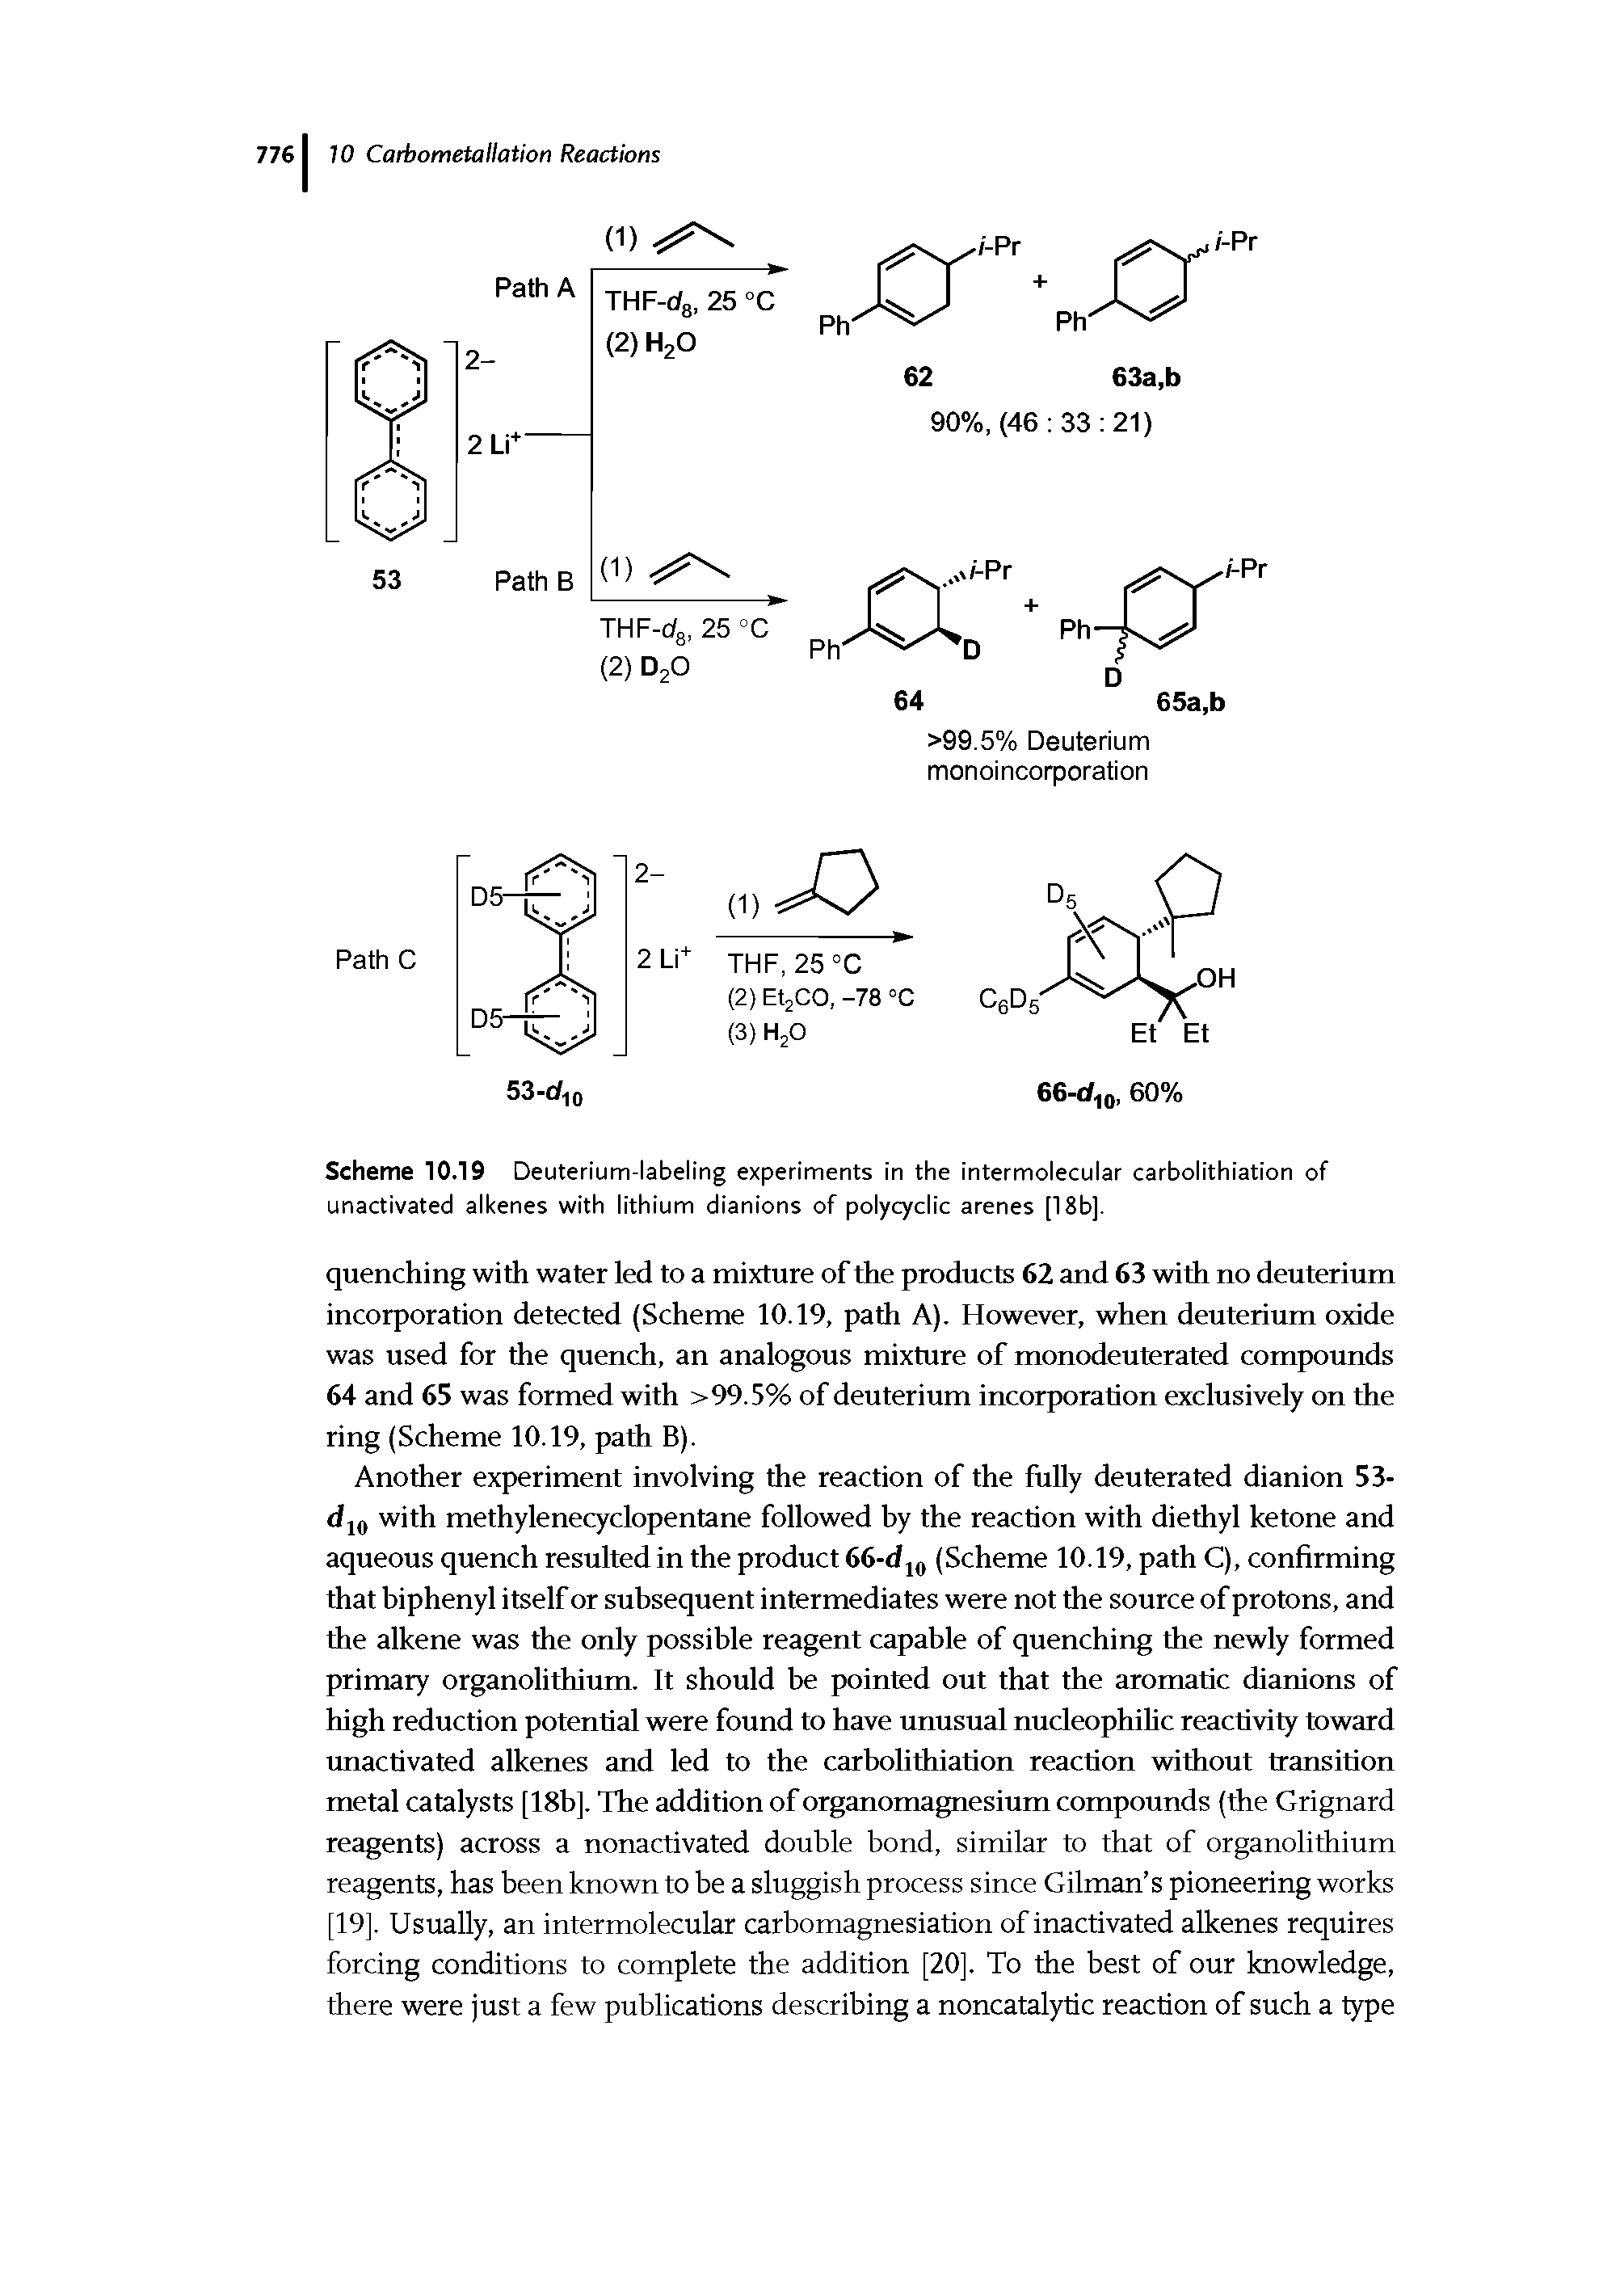 Scheme 10.19 Deuterium-labeling experiments in the intermolecular carbolithiation of unactivated alkenes with lithium dianions of polycyclic arenes [18b].